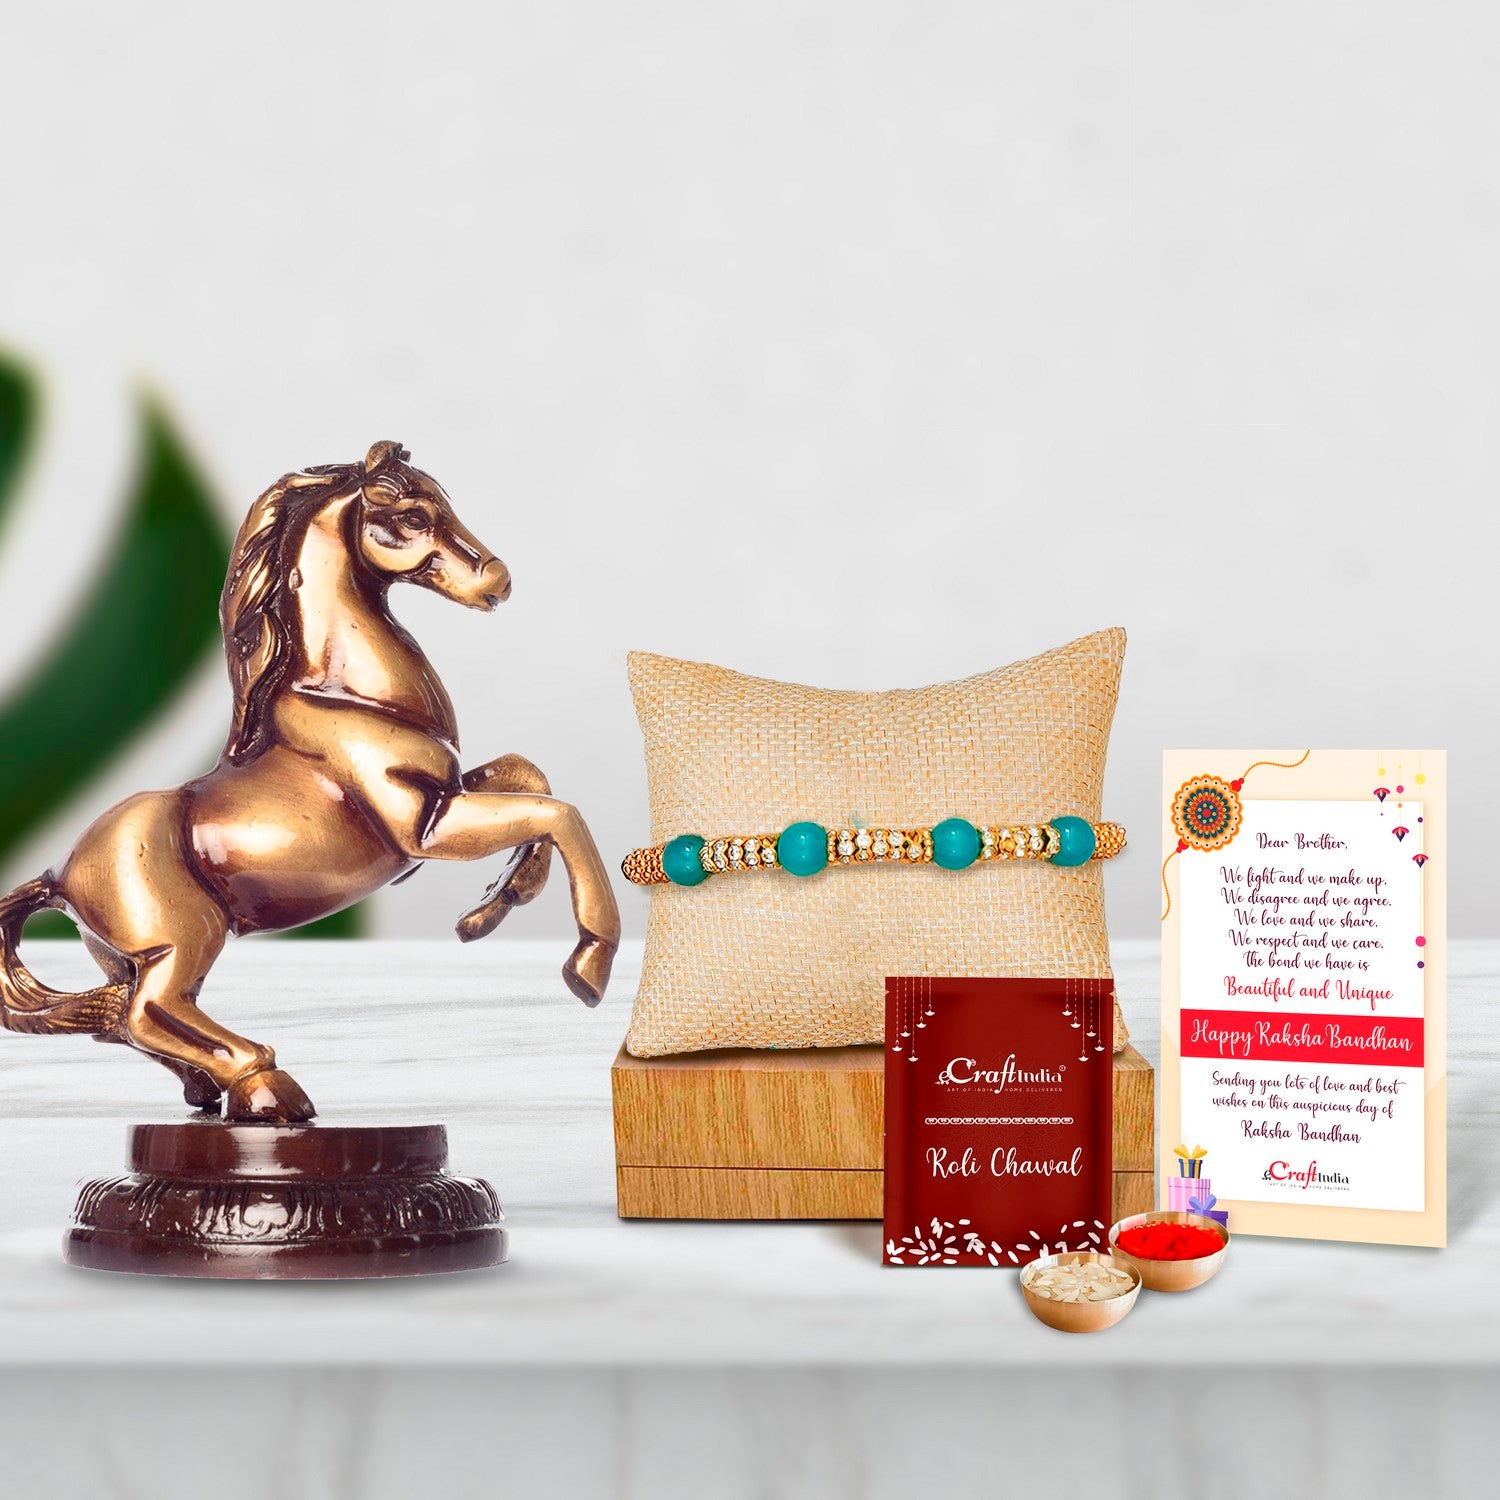 Designer Pearl Rakhi with Brass Horse Tableware Antique Showpiece and Roli Chawal Pack, Best Wishes Greeting Card